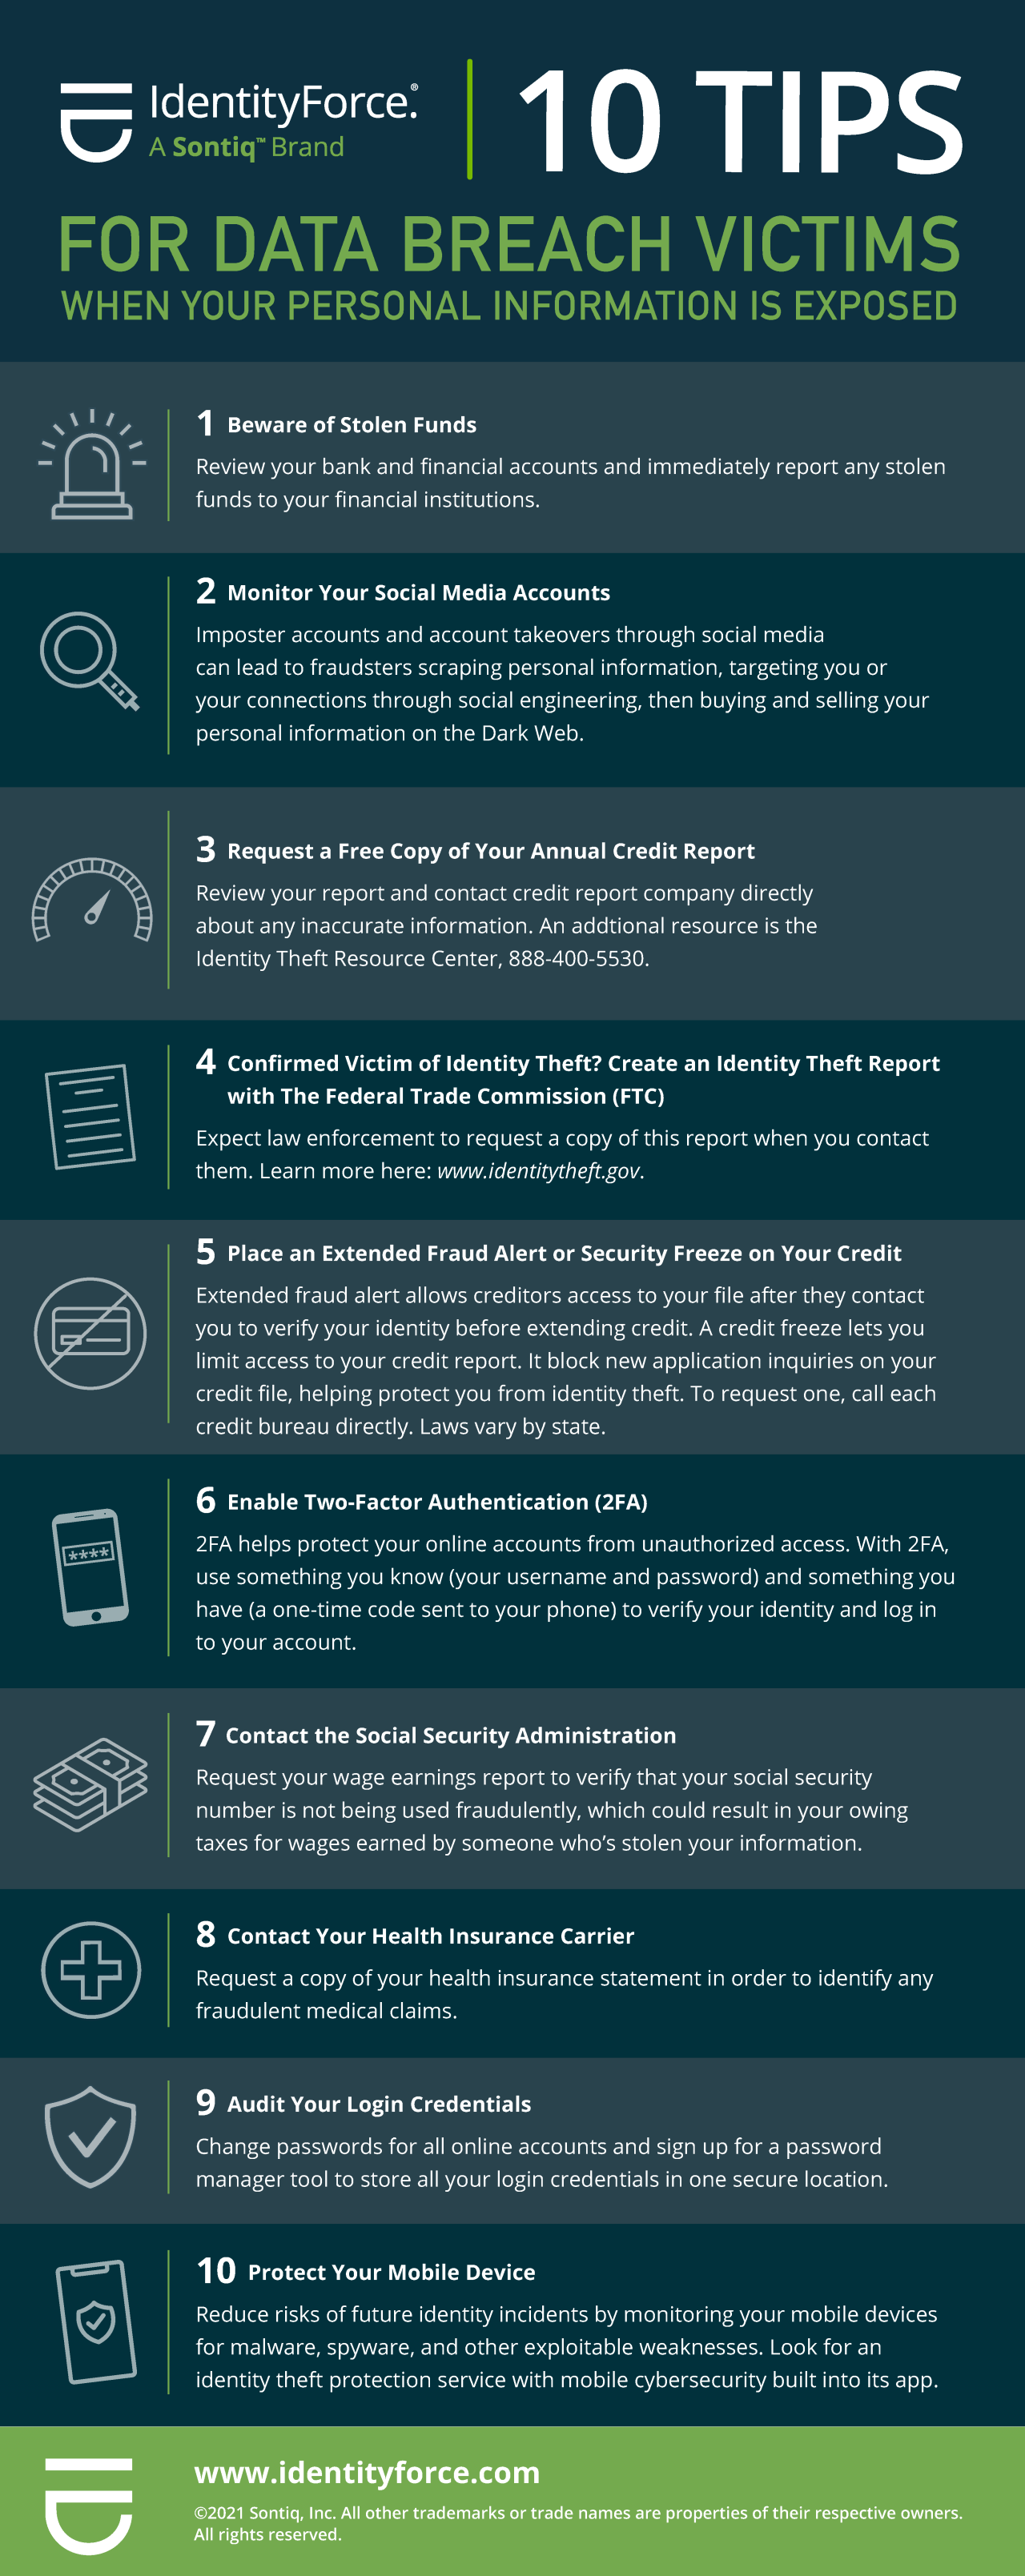 10 Tips for Breach Victims in 2021